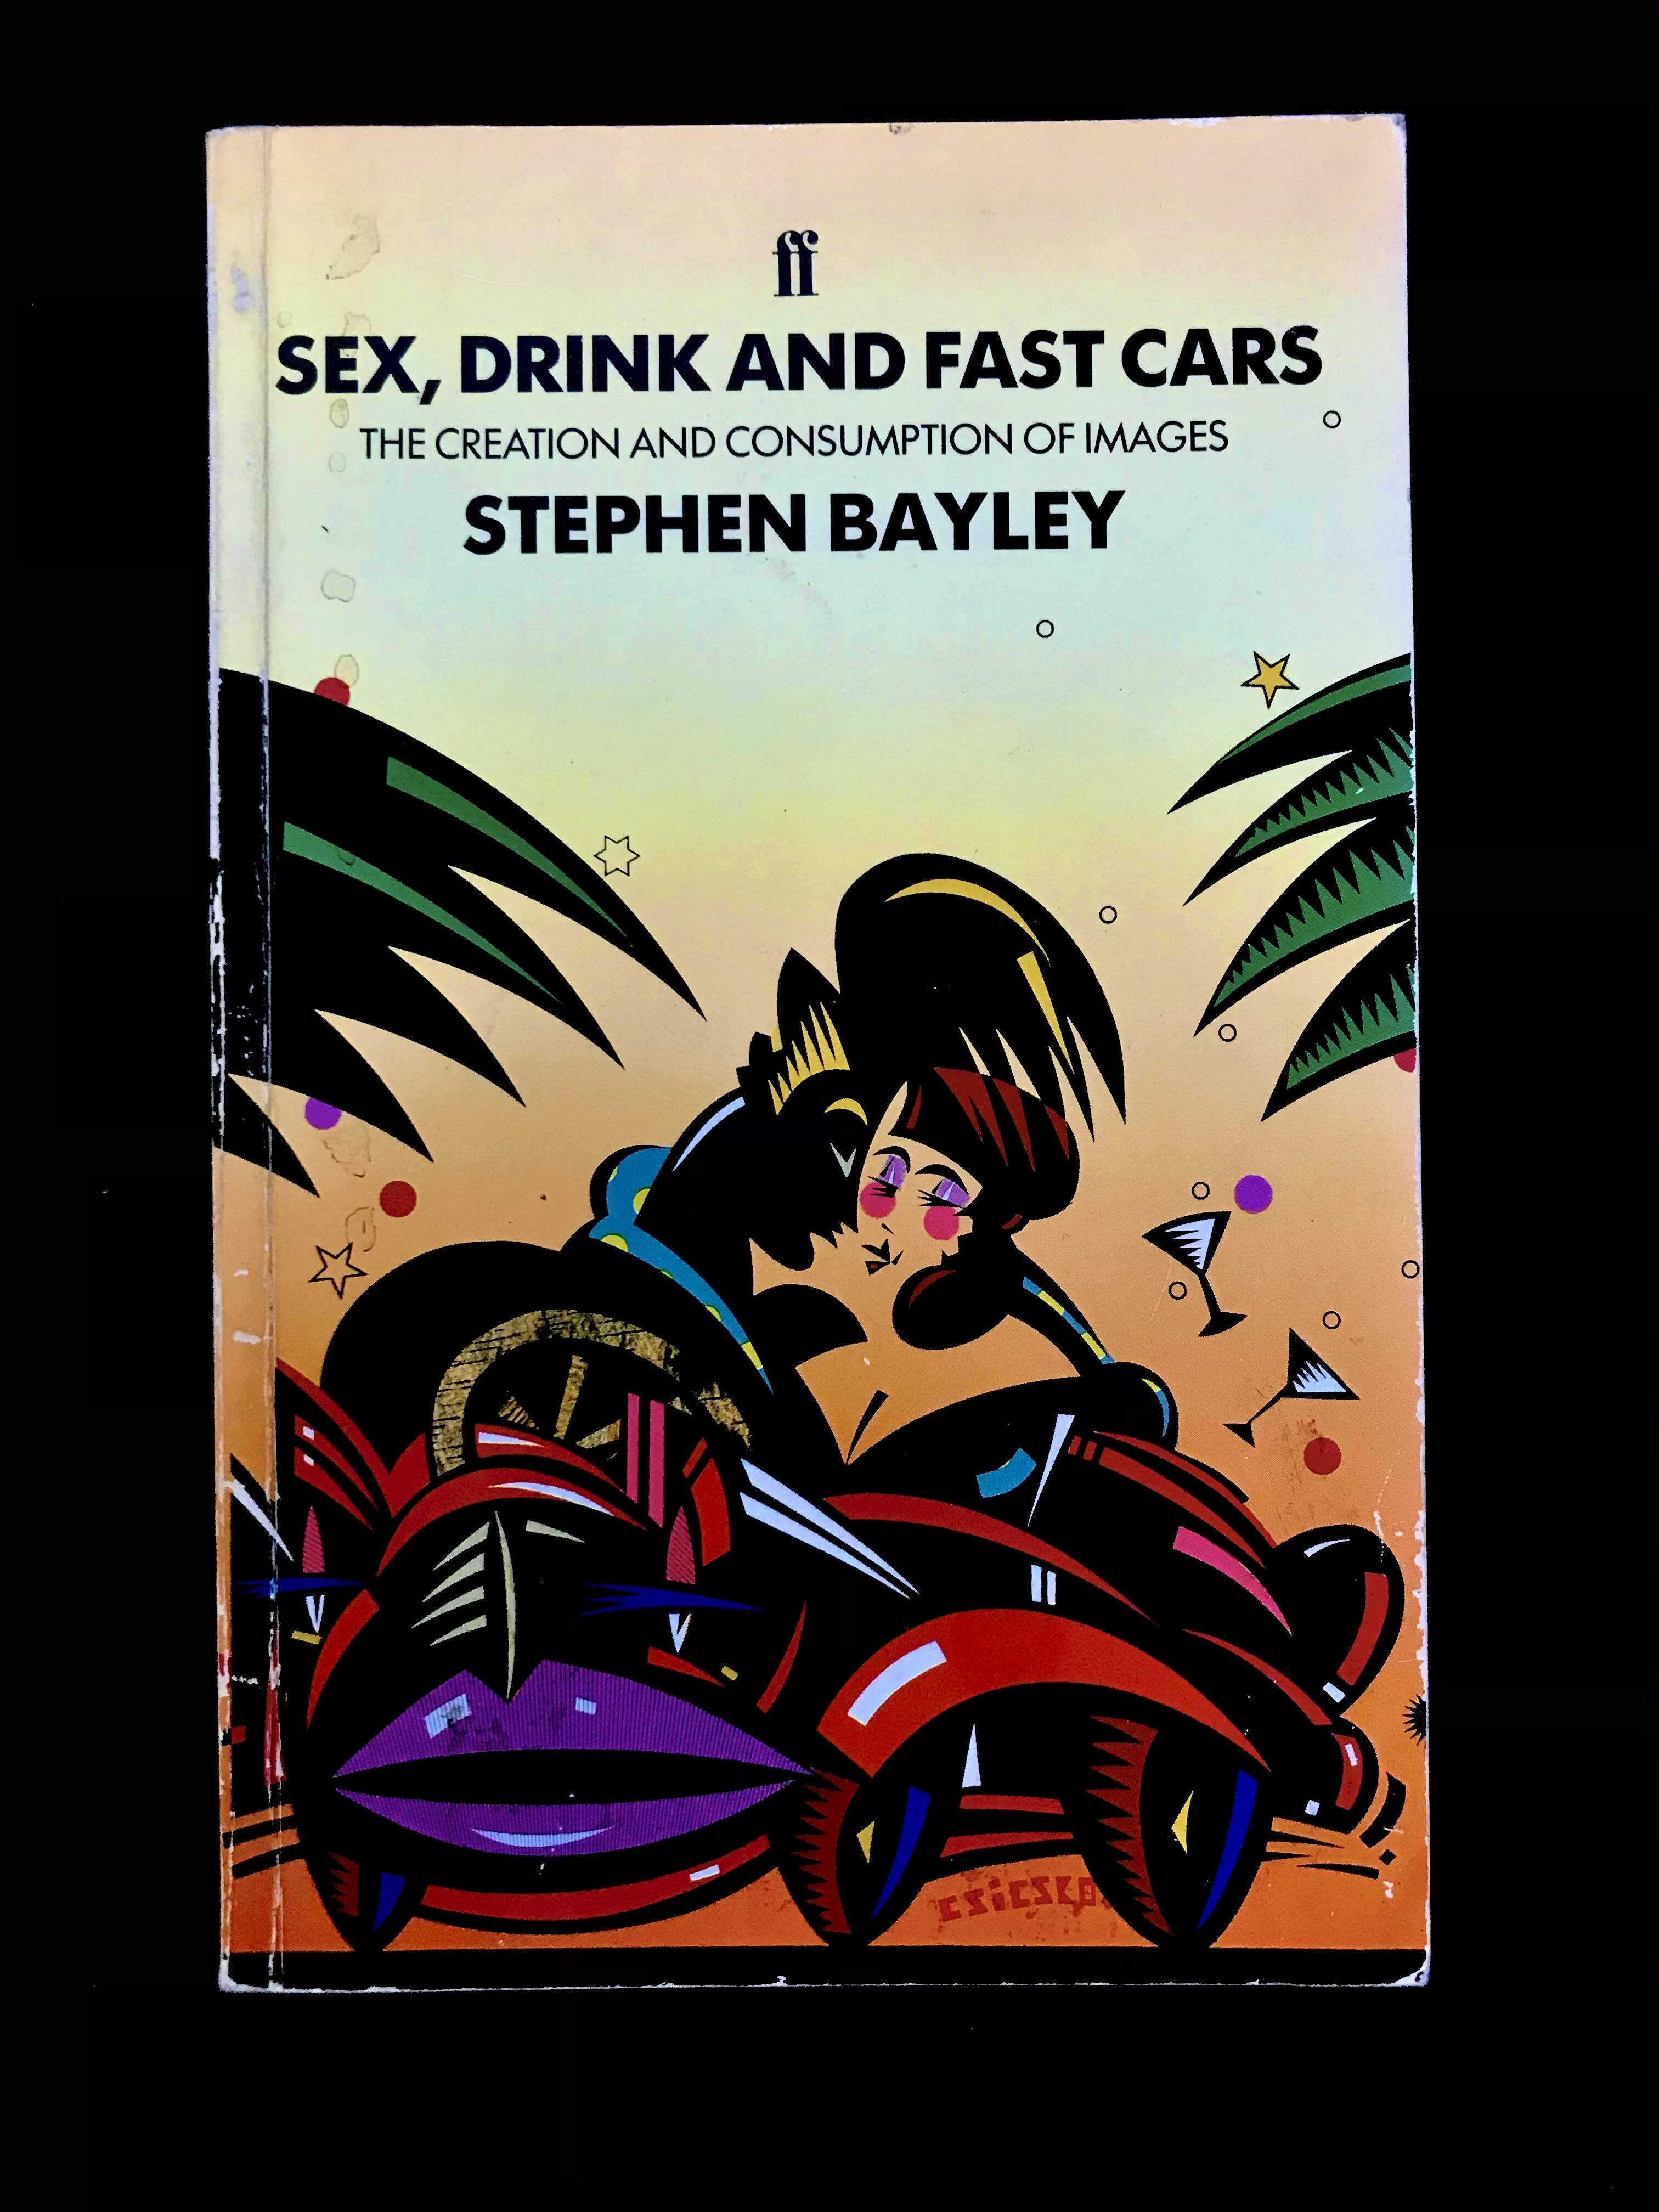 Sex, Drink & Fast Cars: The Creation of Consumption Images by Stephan Bayley